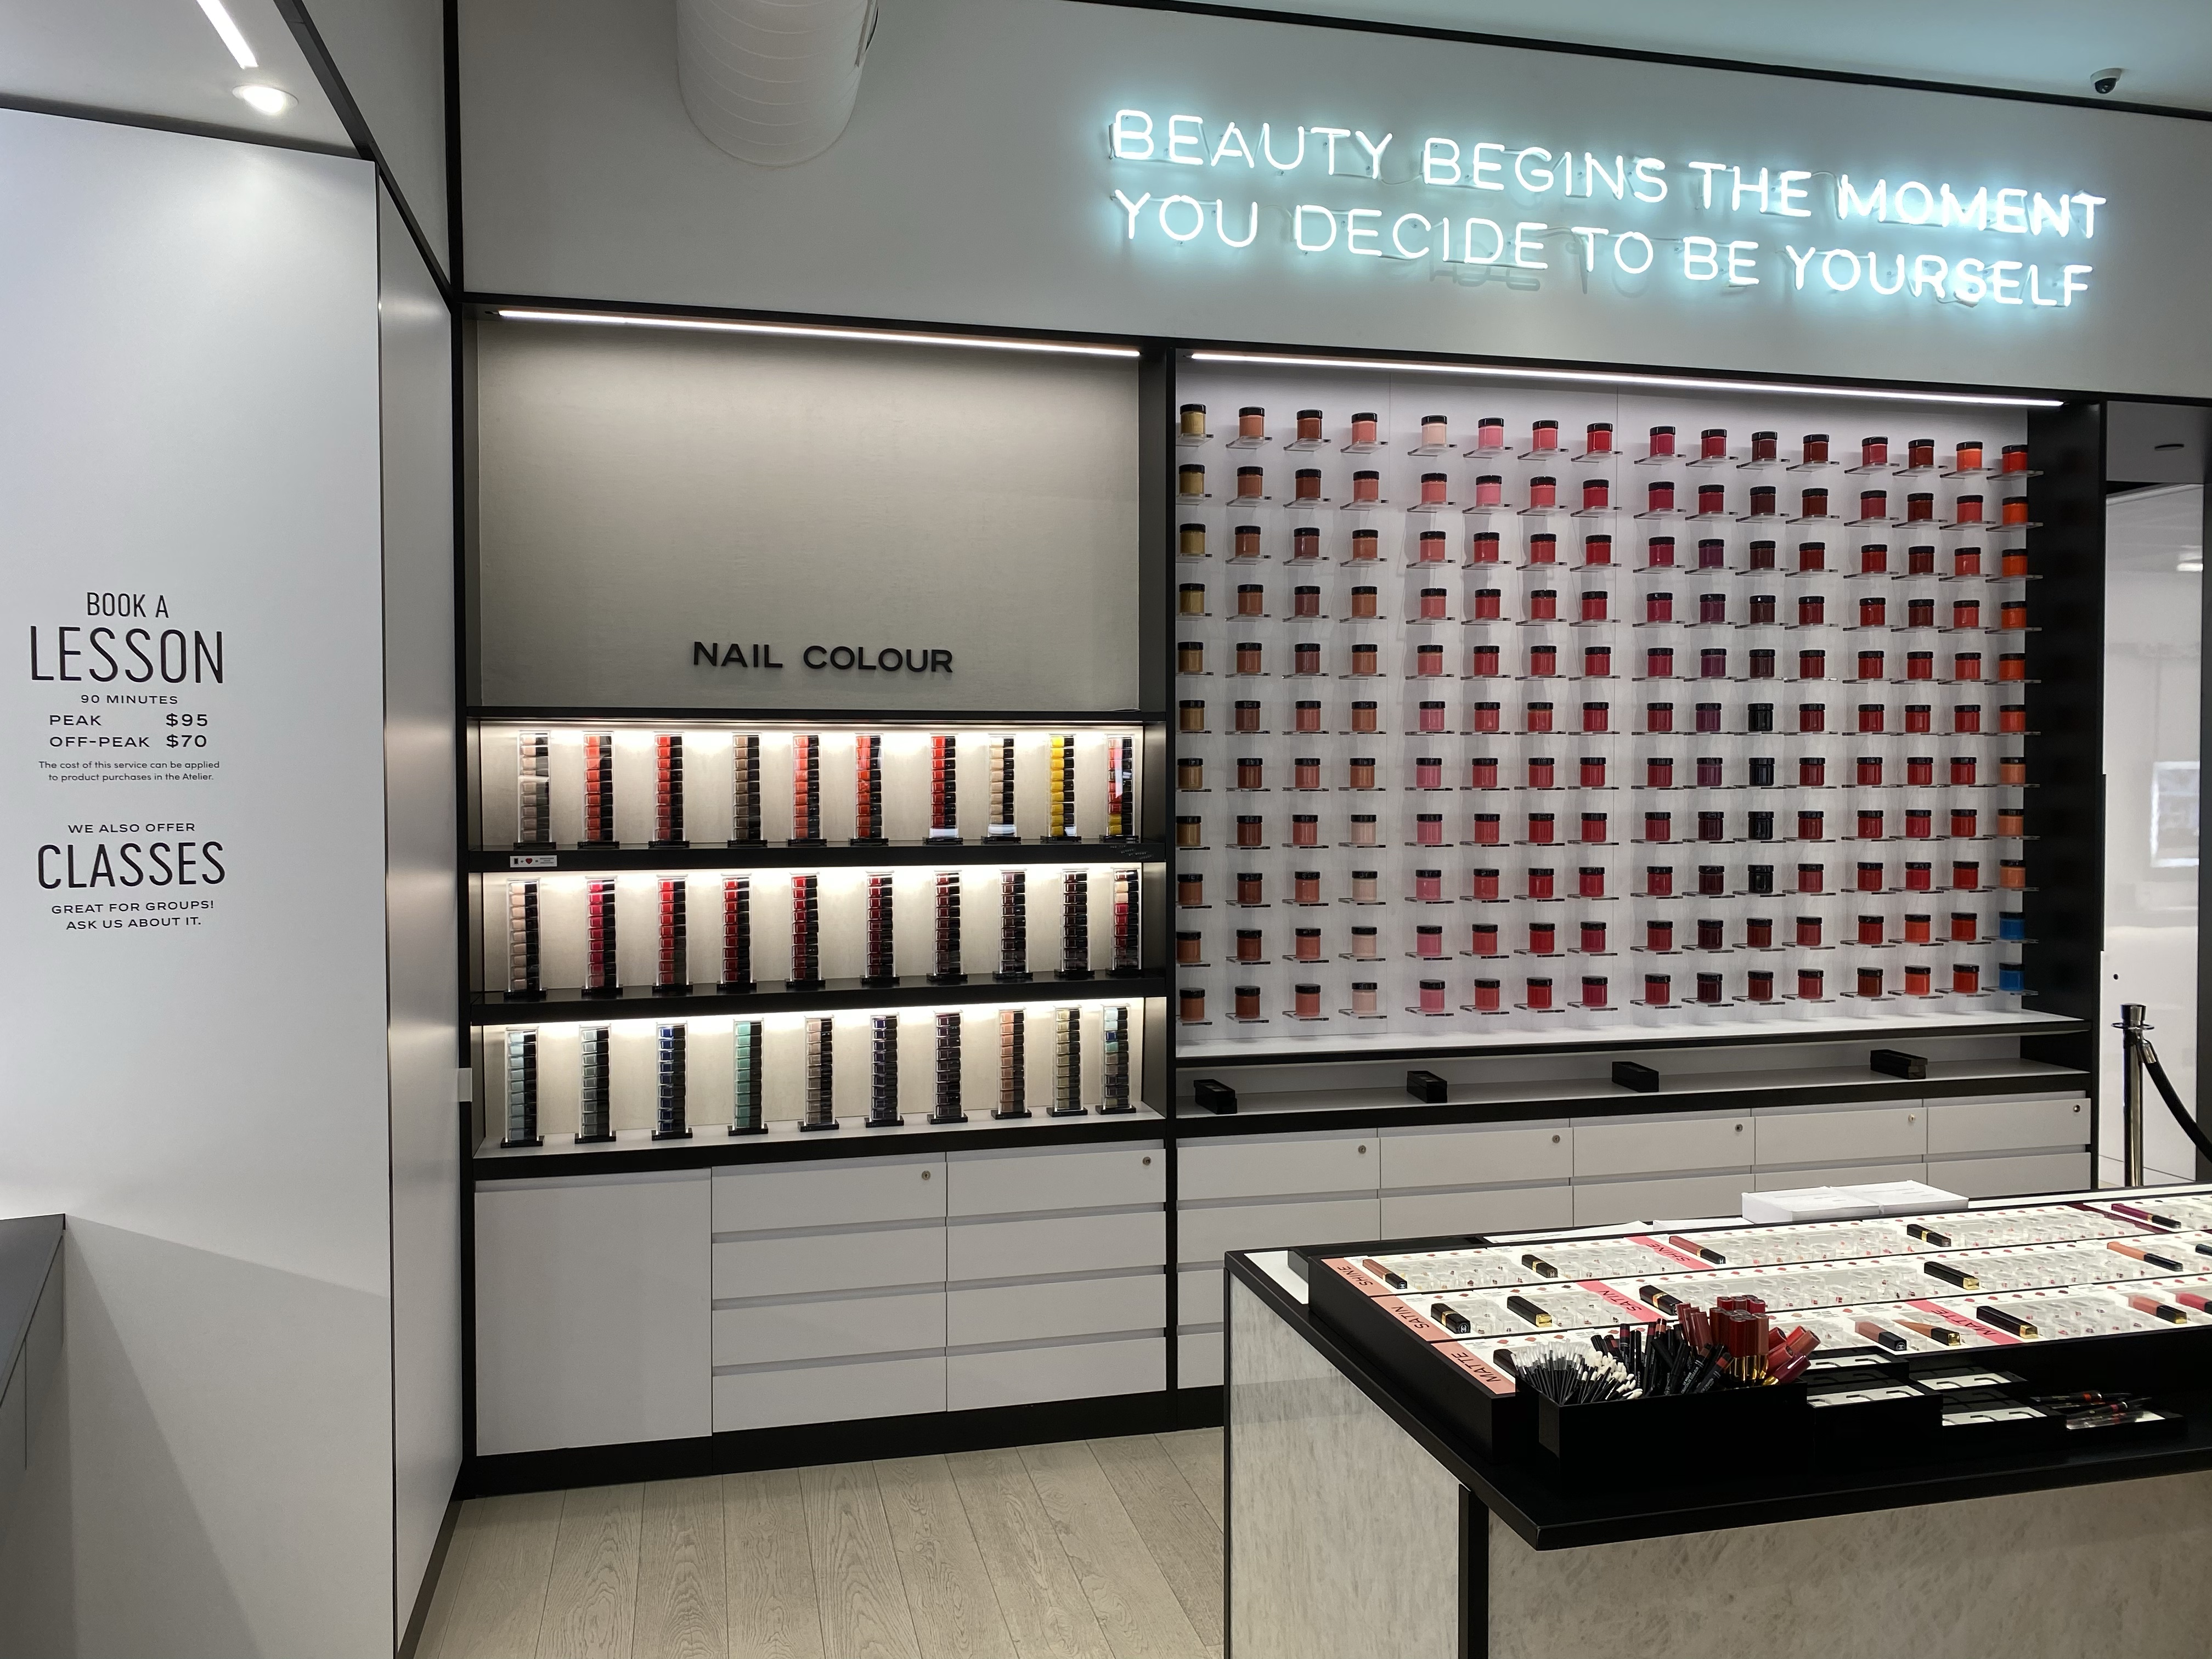 NRF | 10 must-see New York stores